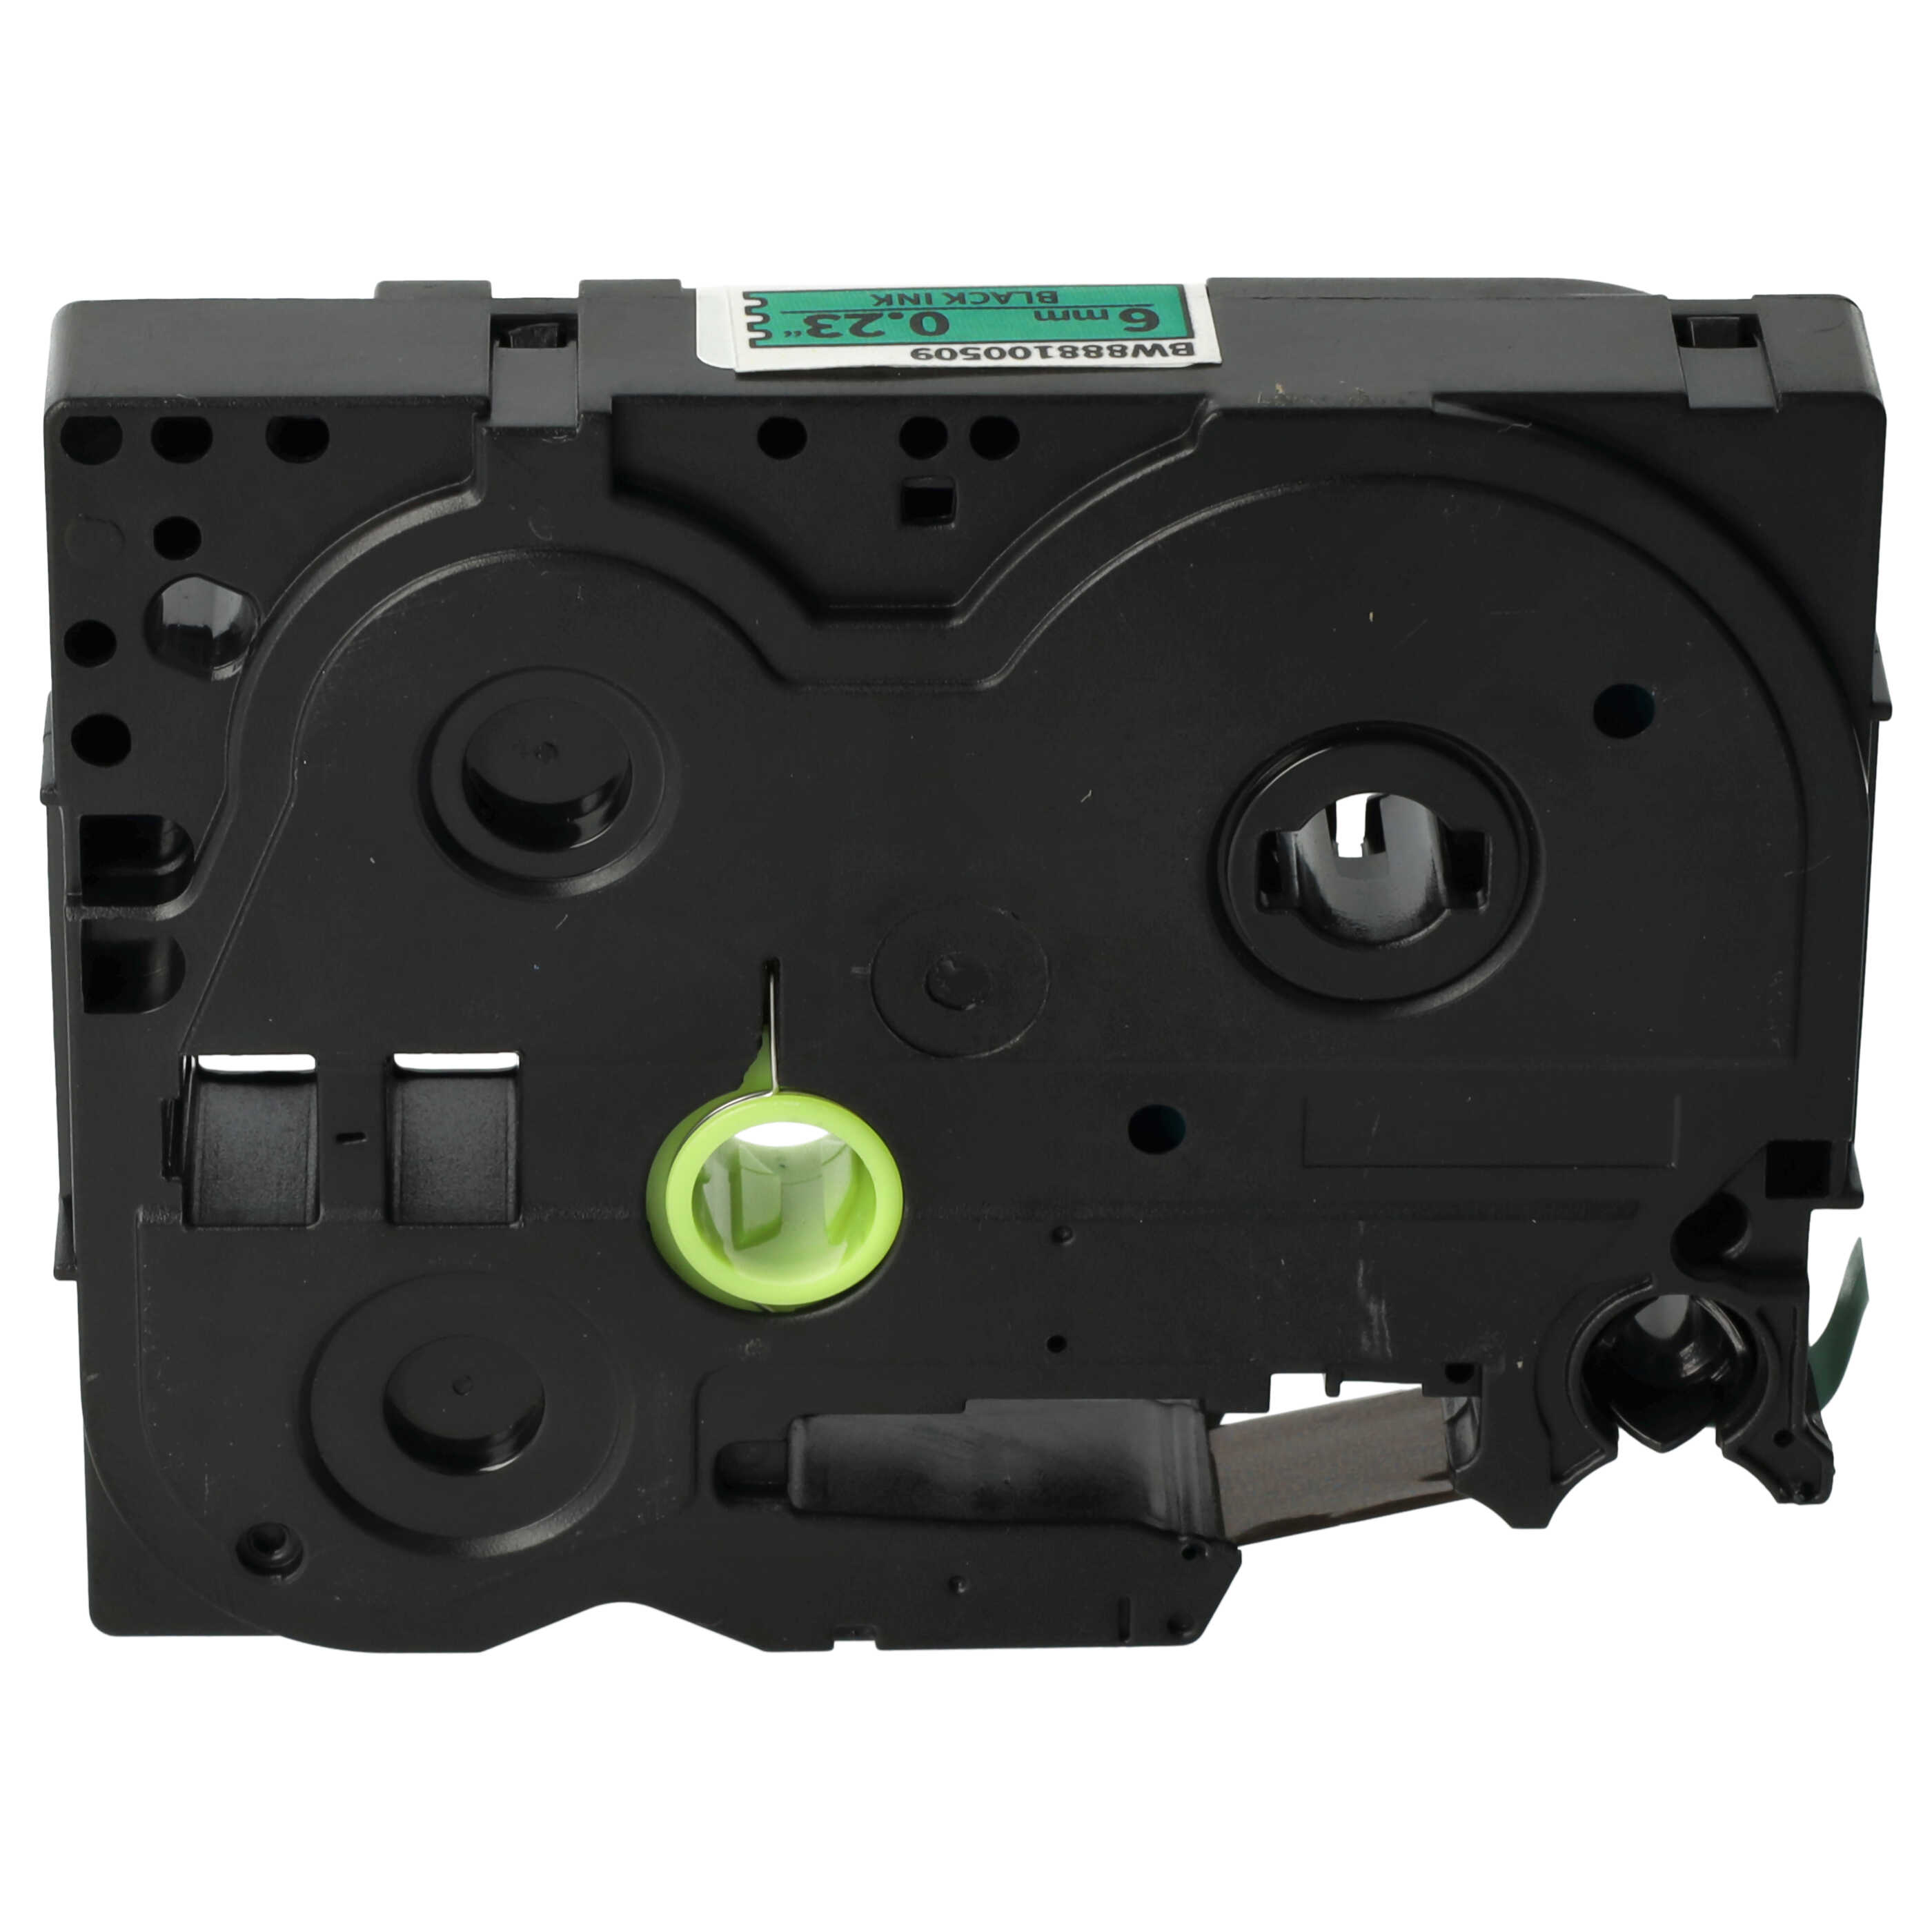 Label Tape as Replacement for Brother TZE-FX711, TZFX711, TZeFX711, TZ-FX711 - 6 mm Black to Green, Flexible